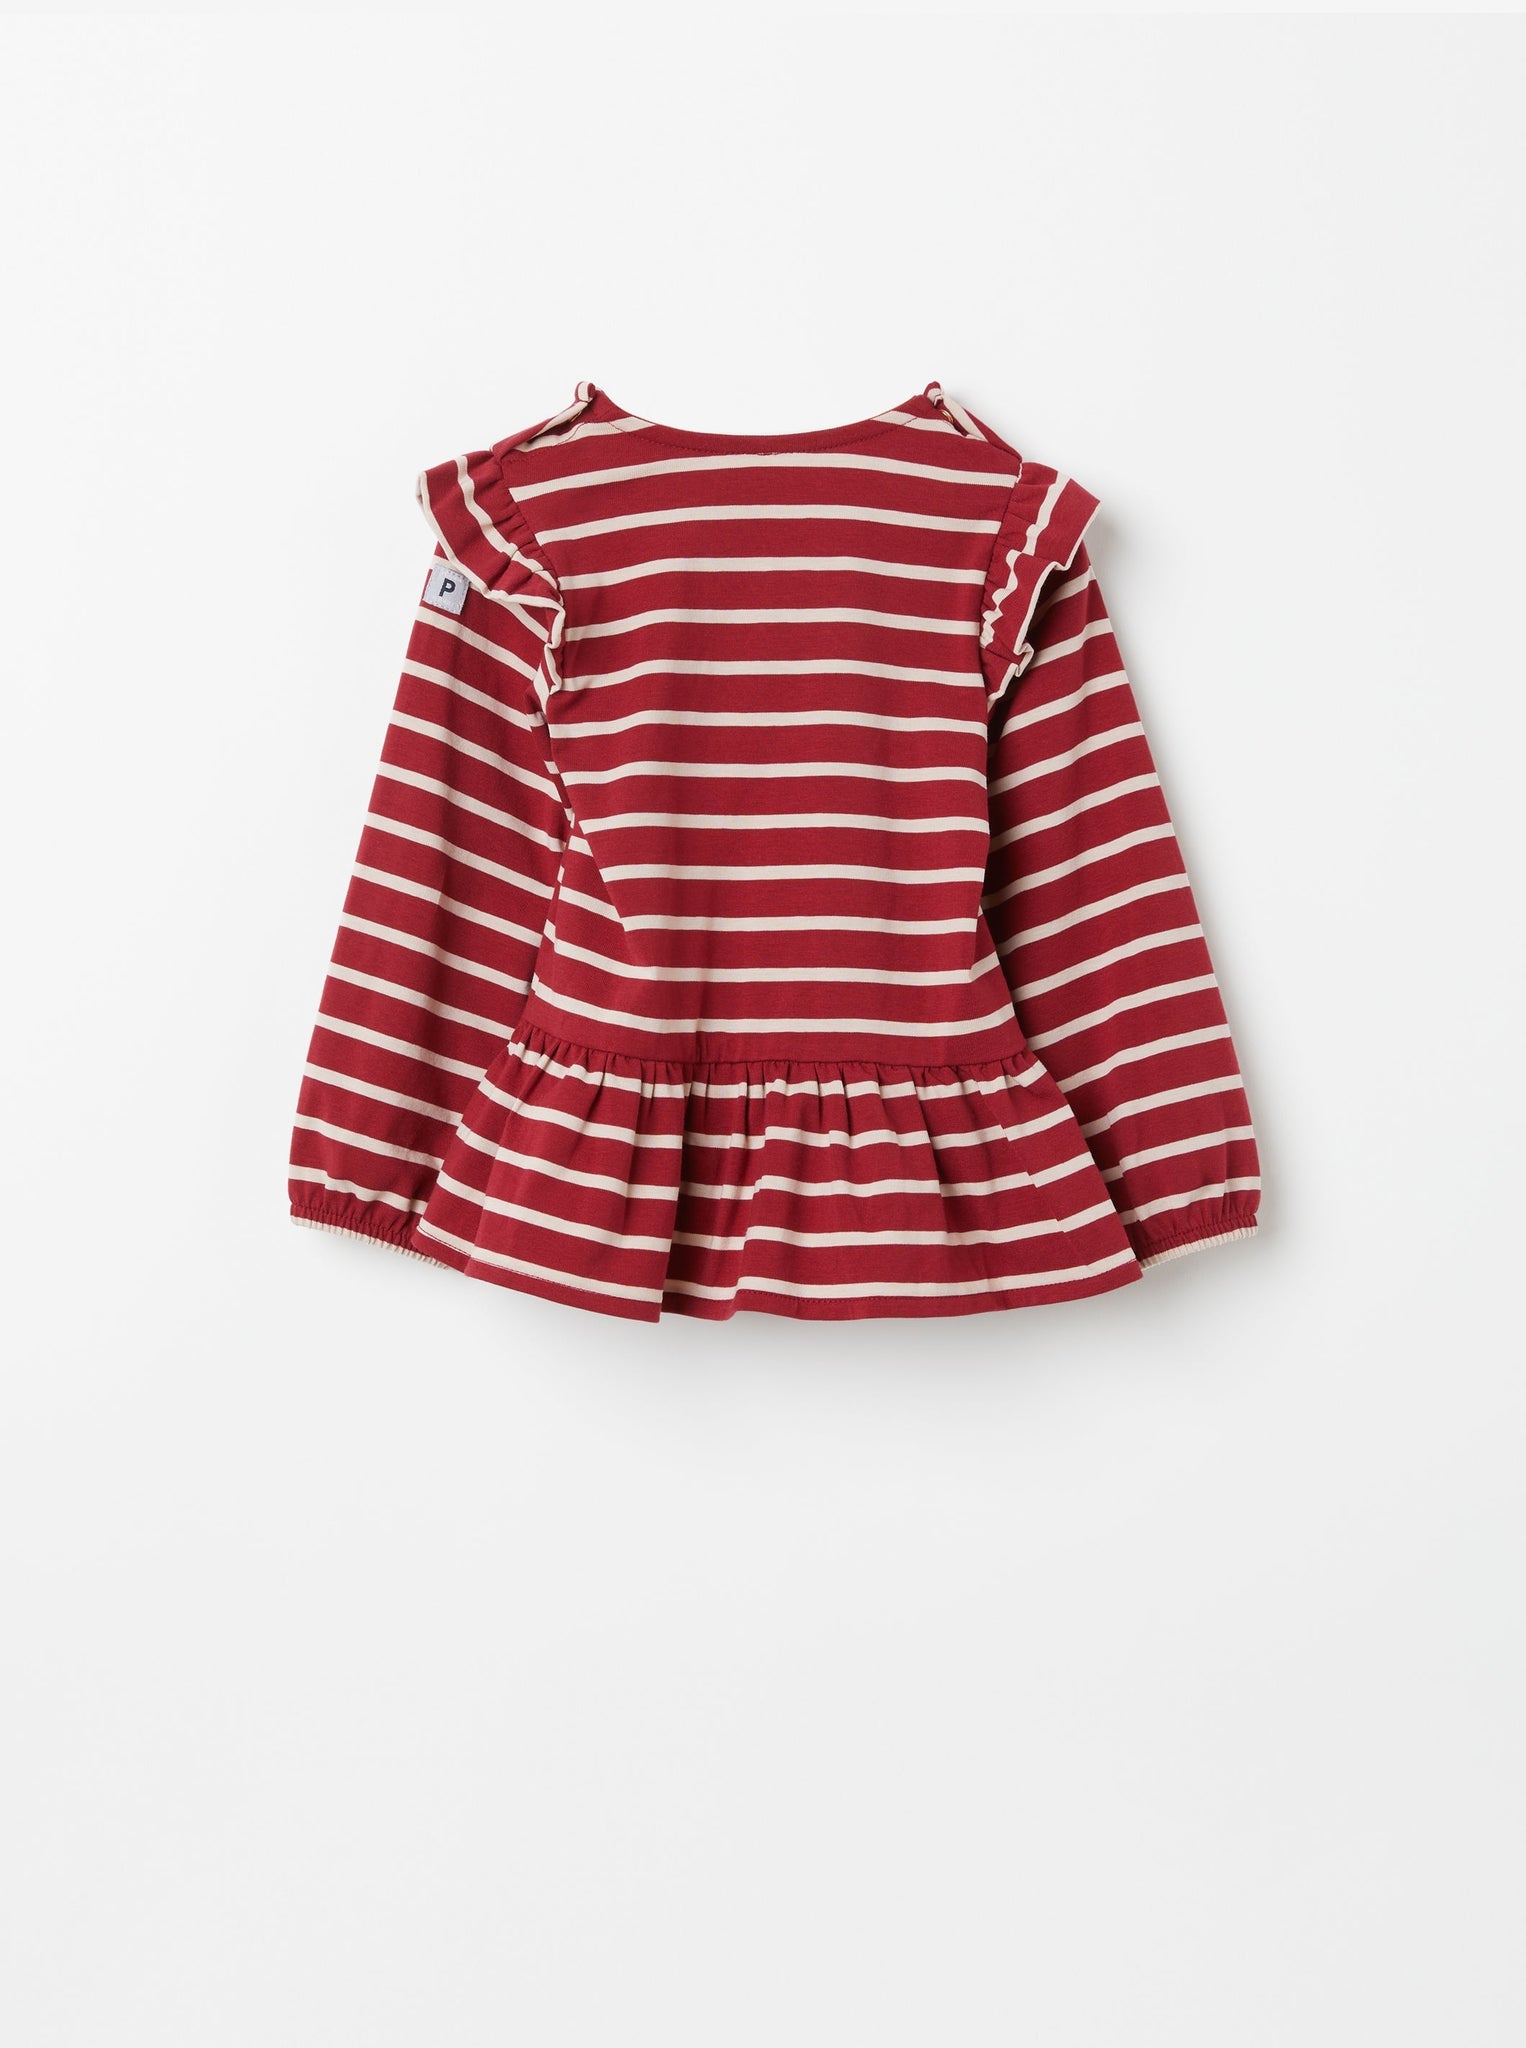 Striped Red Organic Cotton Baby Top from the Polarn O. Pyret baby collection. The best ethical baby clothes